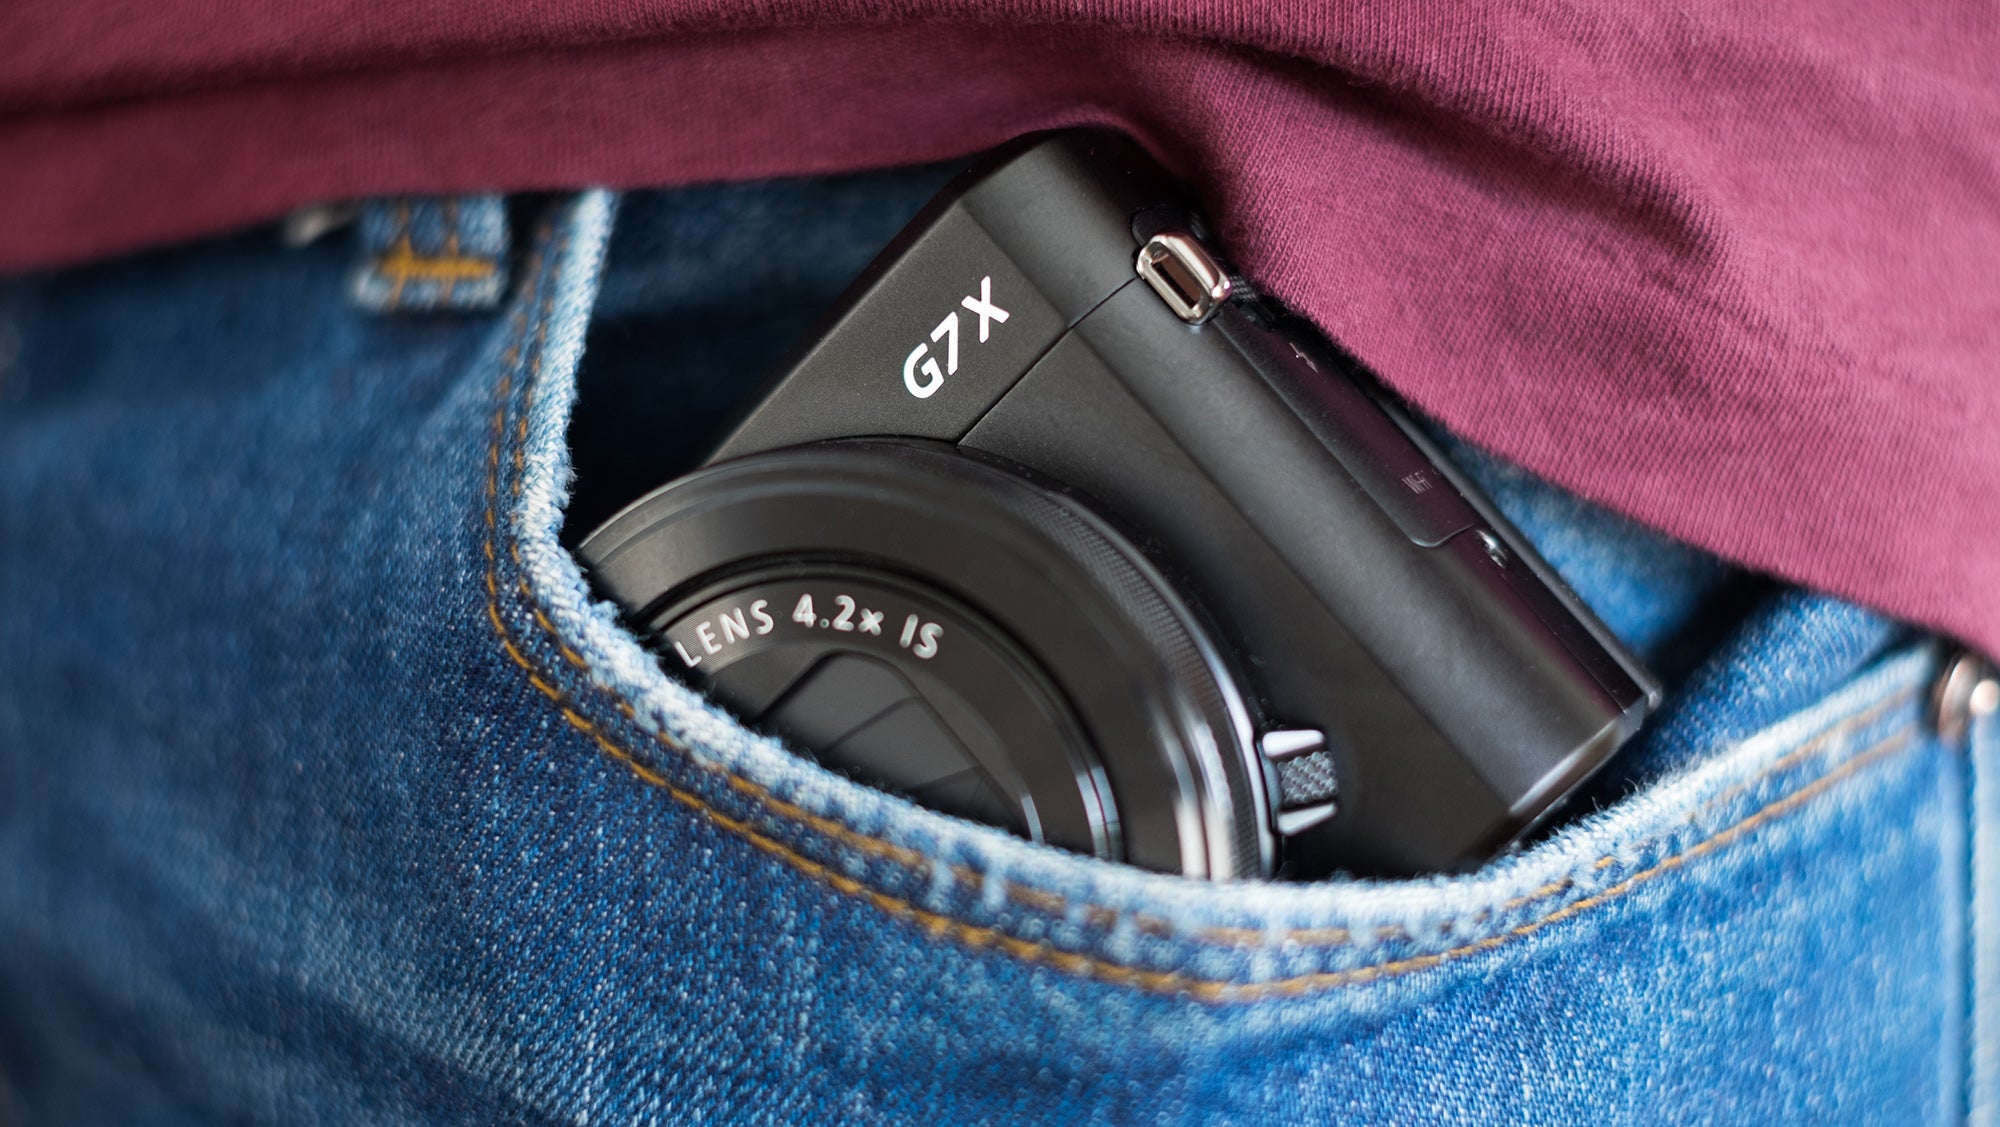 Canon G7 X Mark II review: Pocket-sized brilliance | Expert Reviews